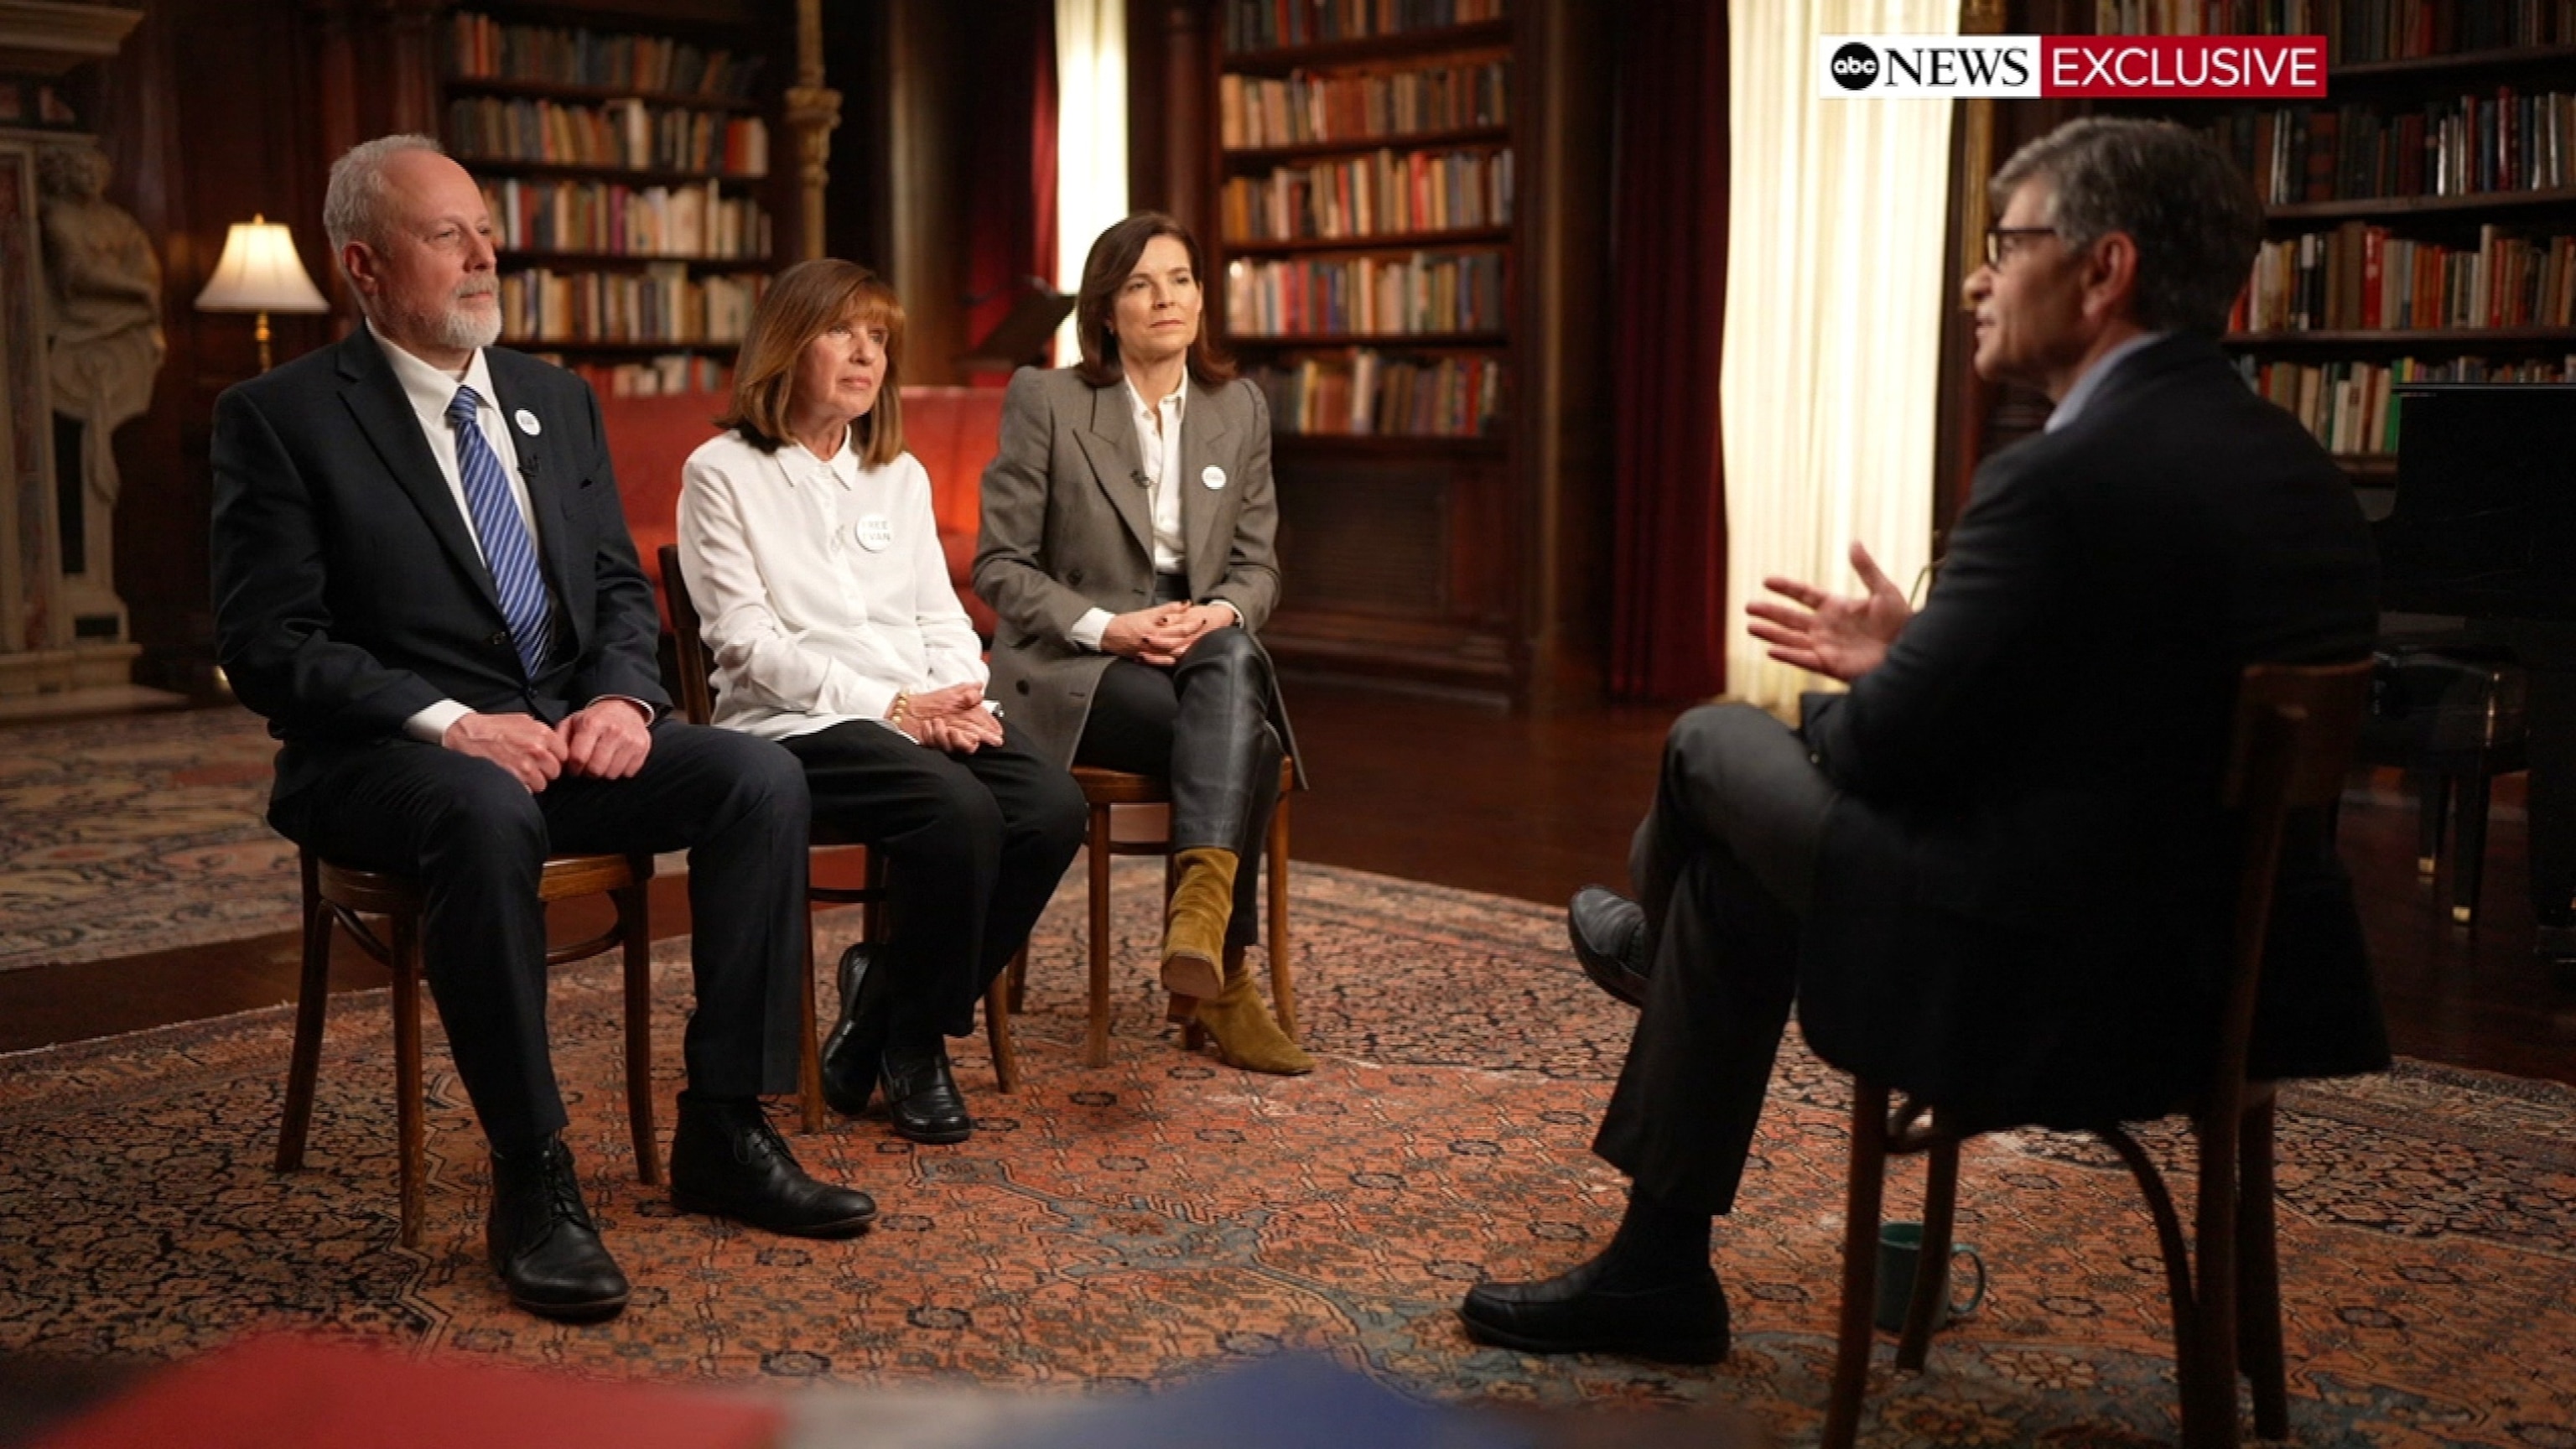 PHOTO: Mikhail Gershkovich and Ella Milman, parents of detained Wall Street Journal reporter Evan Gershkovich as well as Emma Tucker, Editor-in-Chief of The Wall Street Journal speak with George Stephanopoulos during an interview with ABC News.